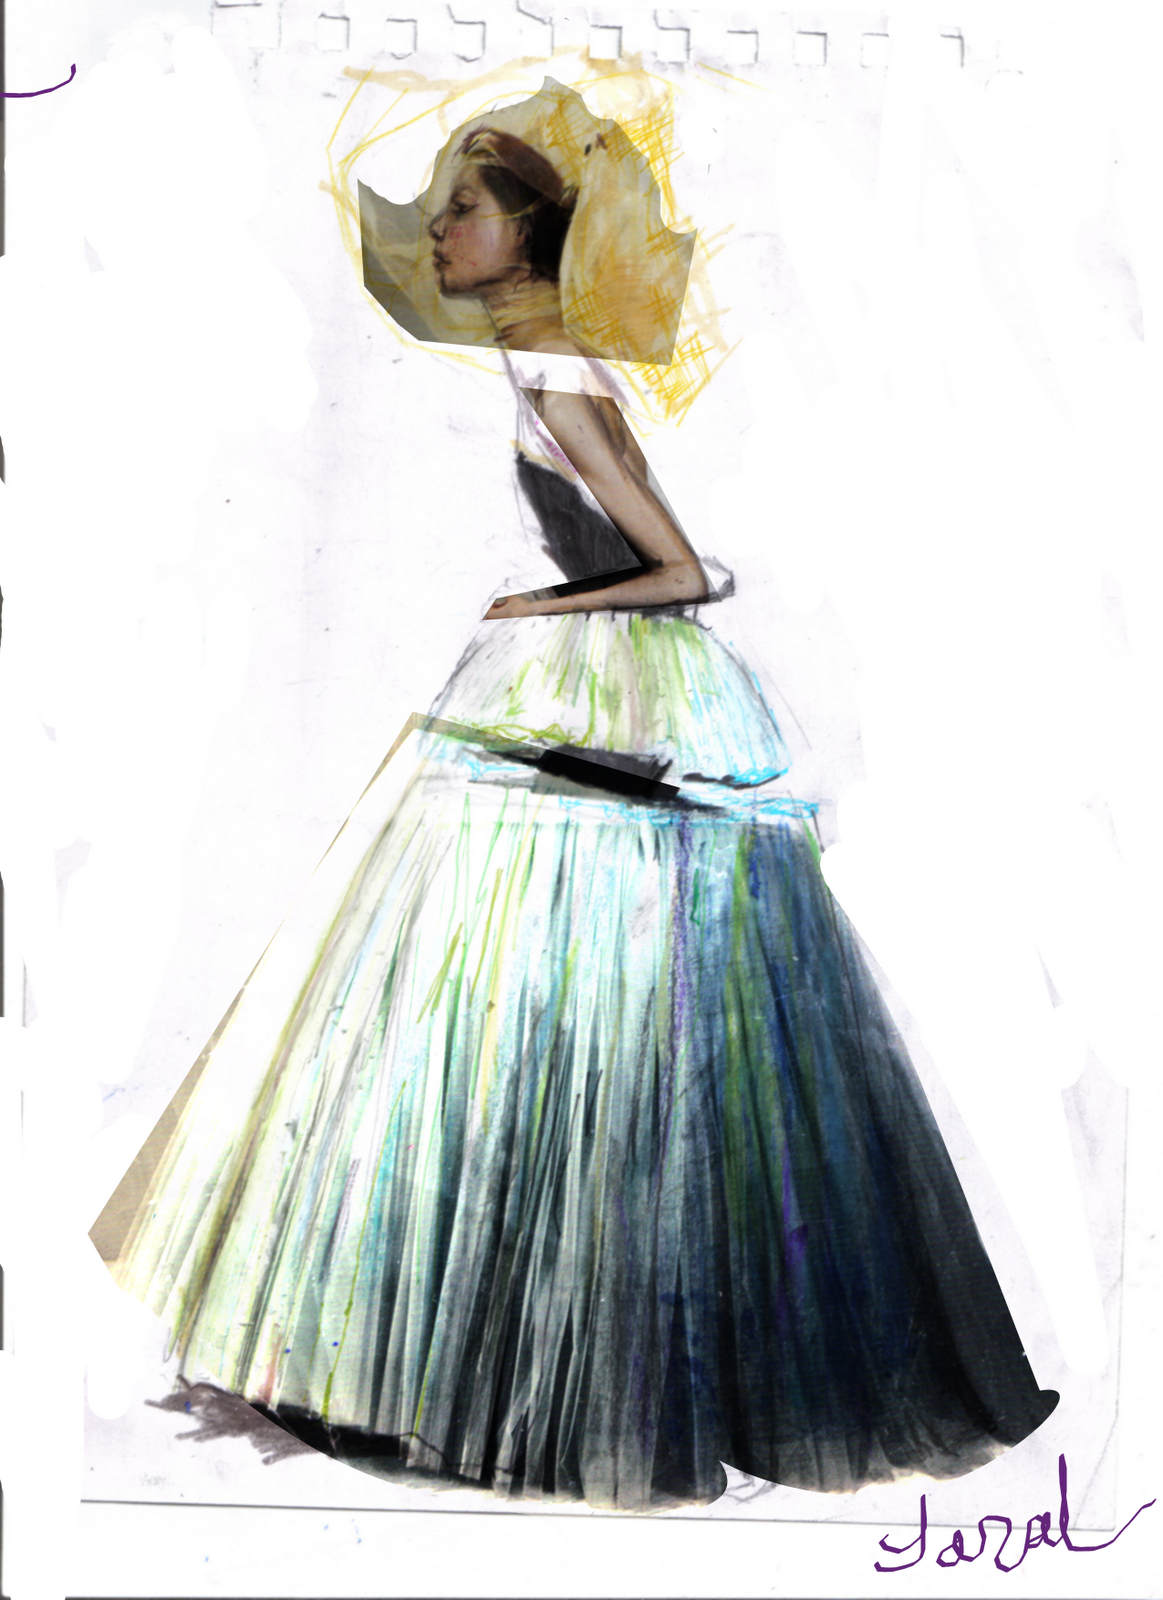 Victor & Rolf Spring/Summer 2010 illustration + review | creature's ...